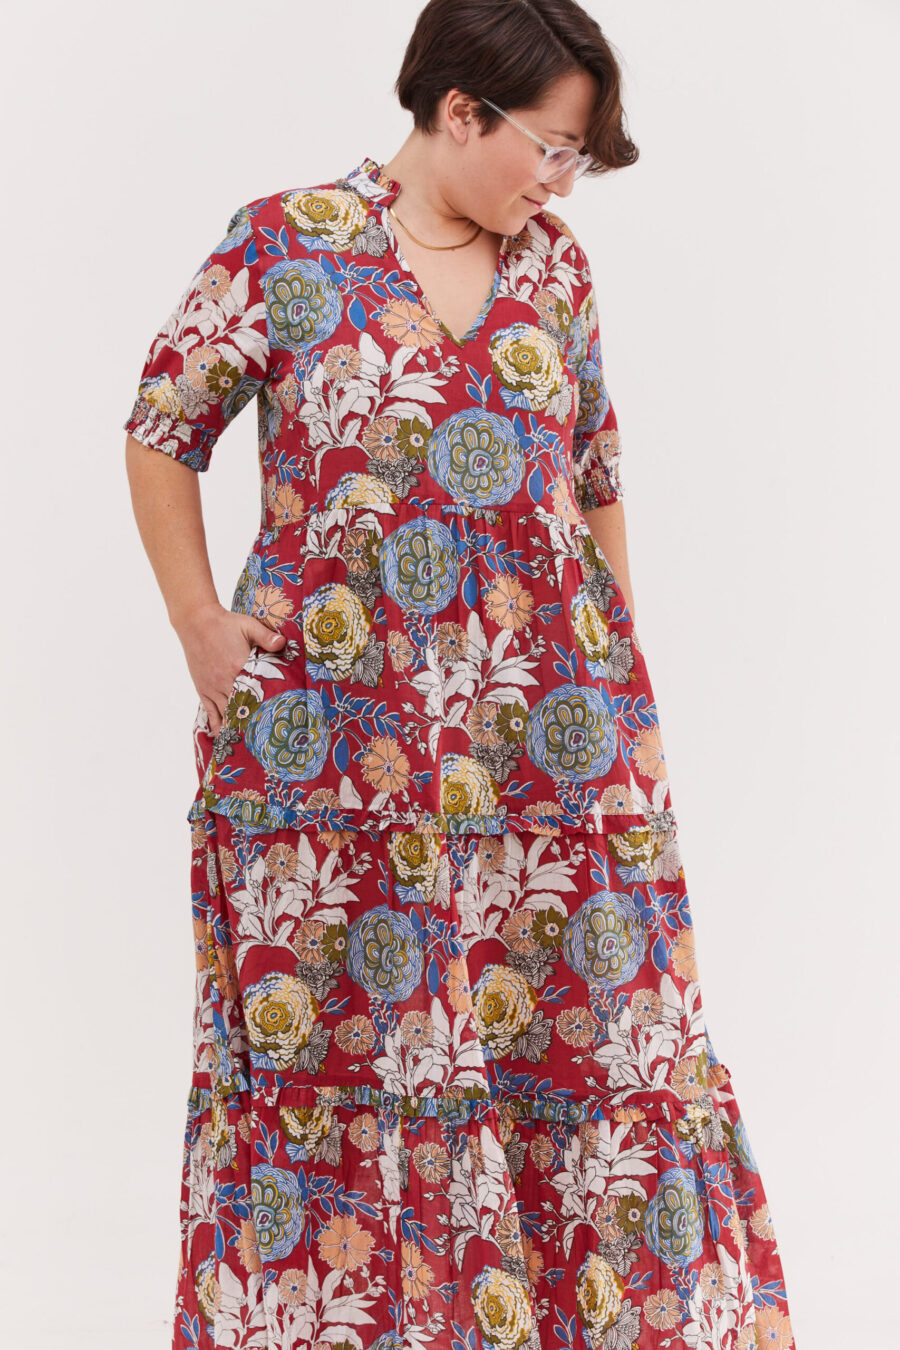 Efrat dress | Uniquely designed maxi dress - Red blossom, colorful floral print on a red dress by comfort zone boutique